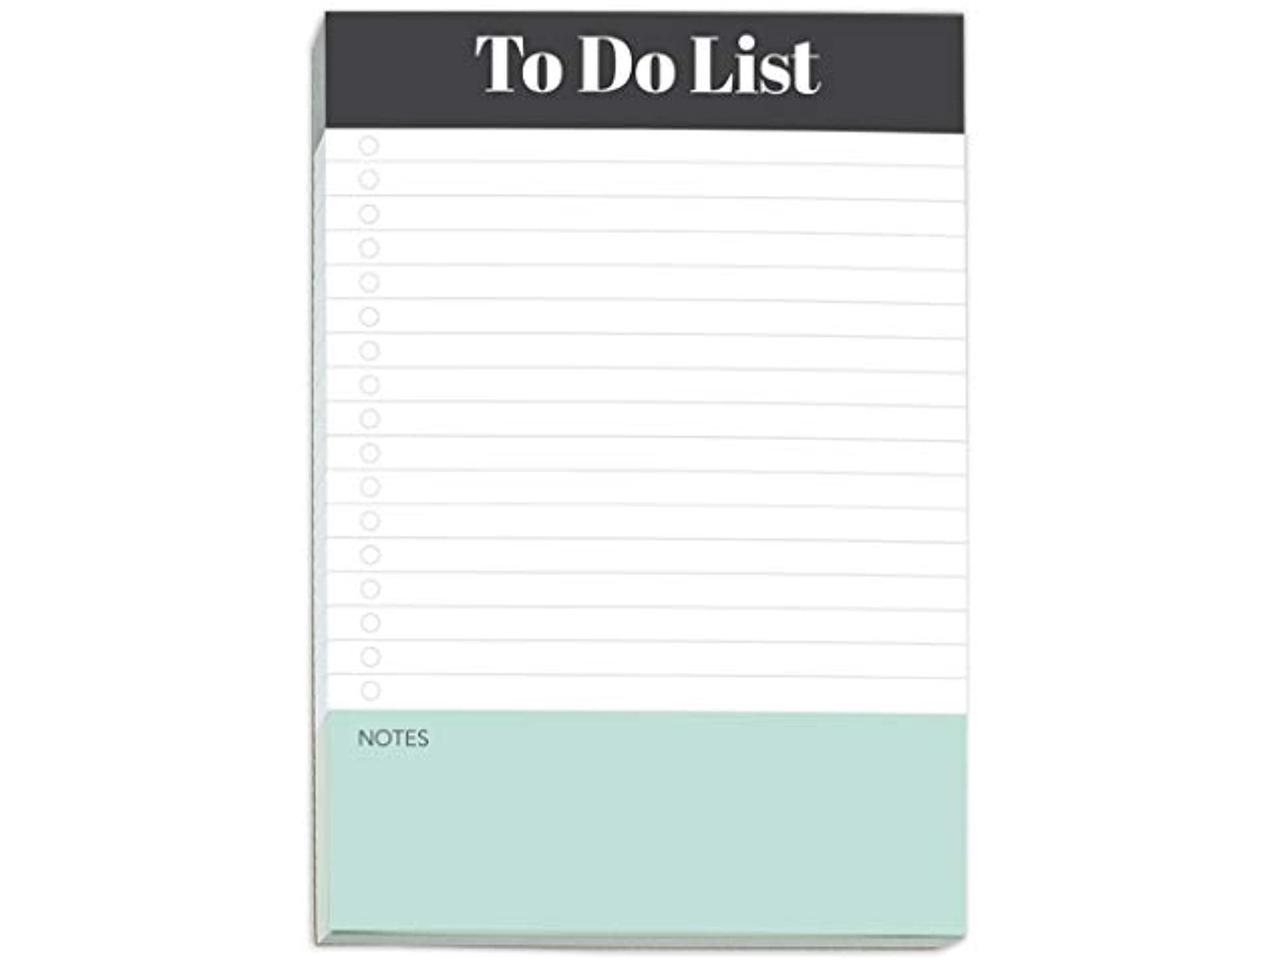 customised planner checklist To do Daily schedule task list magnet done 